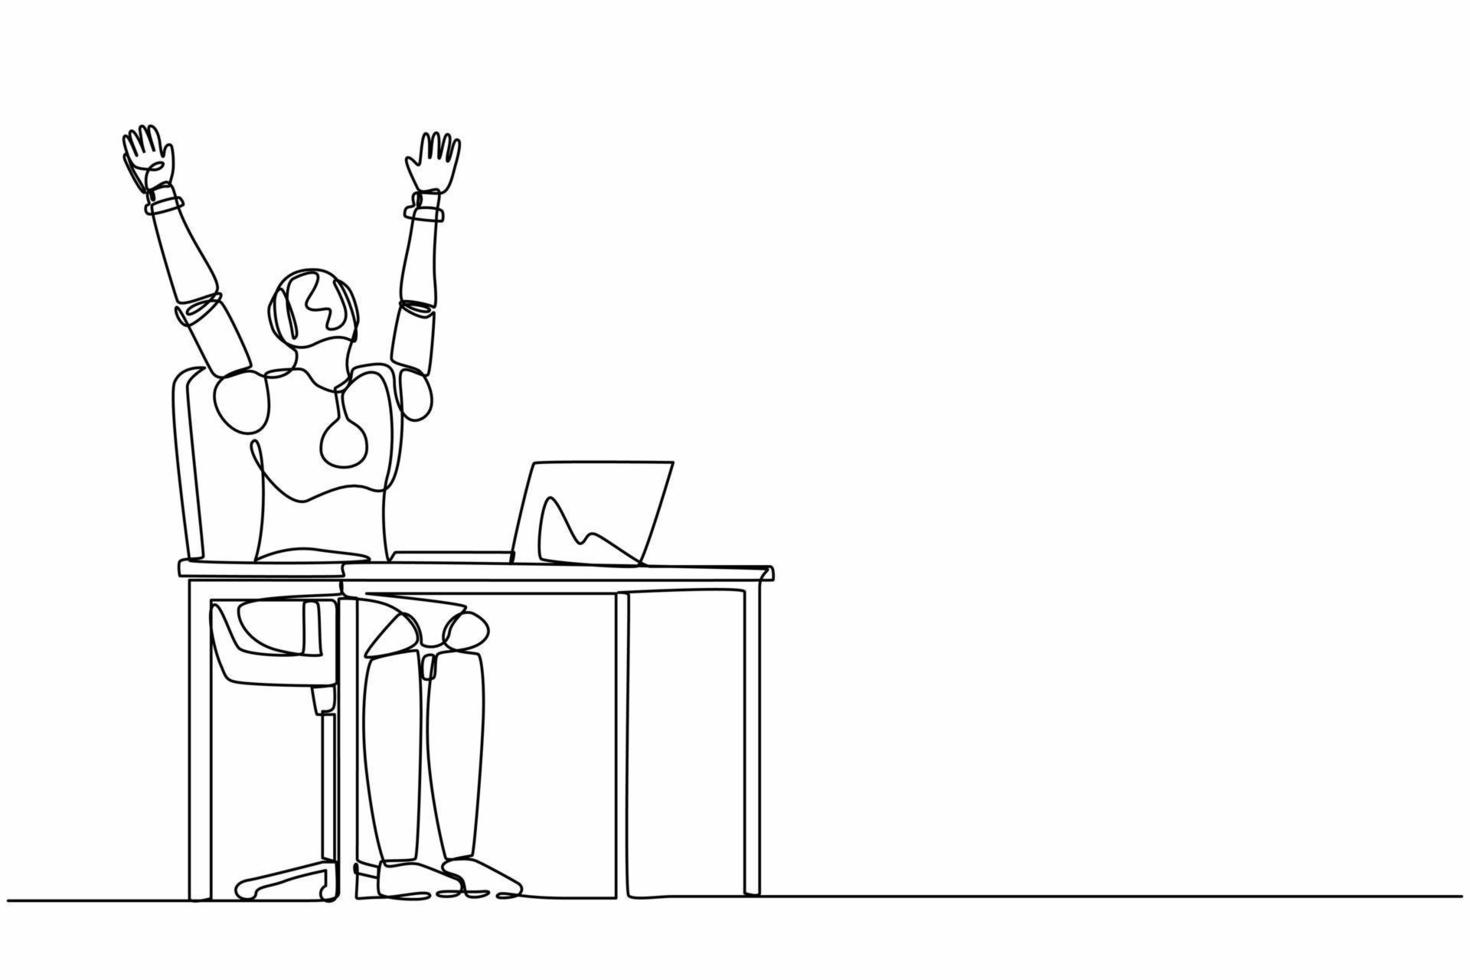 Single one line drawing happy robot at desk celebrating win with hands raised. Future technology development. Artificial intelligence and machine learning. Continuous line design vector illustration